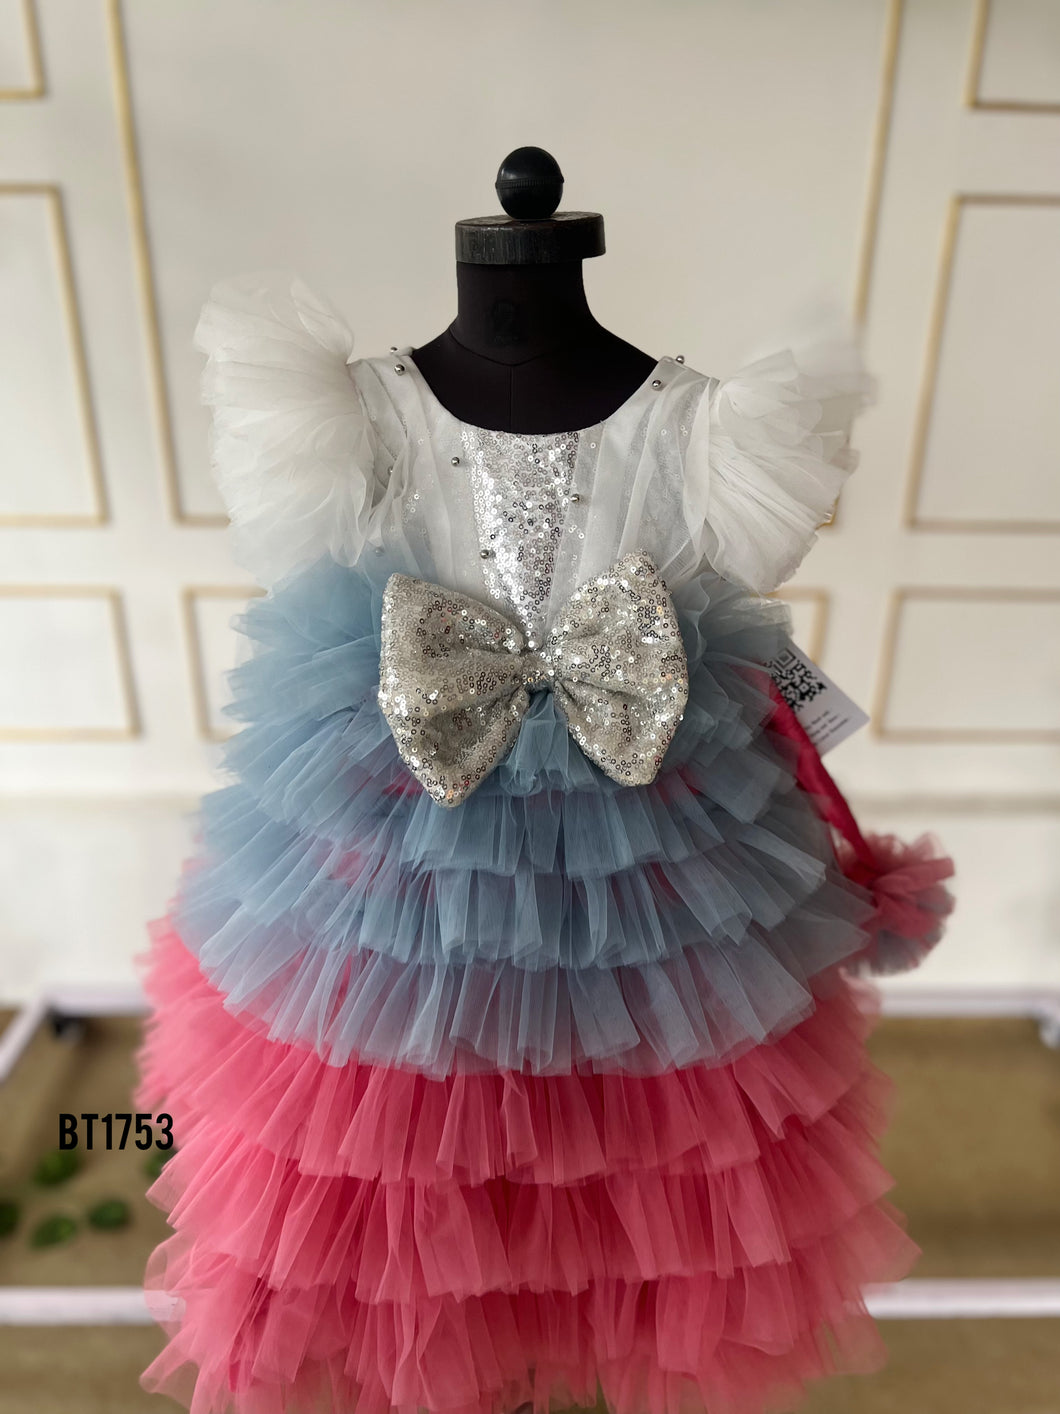 BT1753 Cascading Dreams: Kids' Layered Party Dress